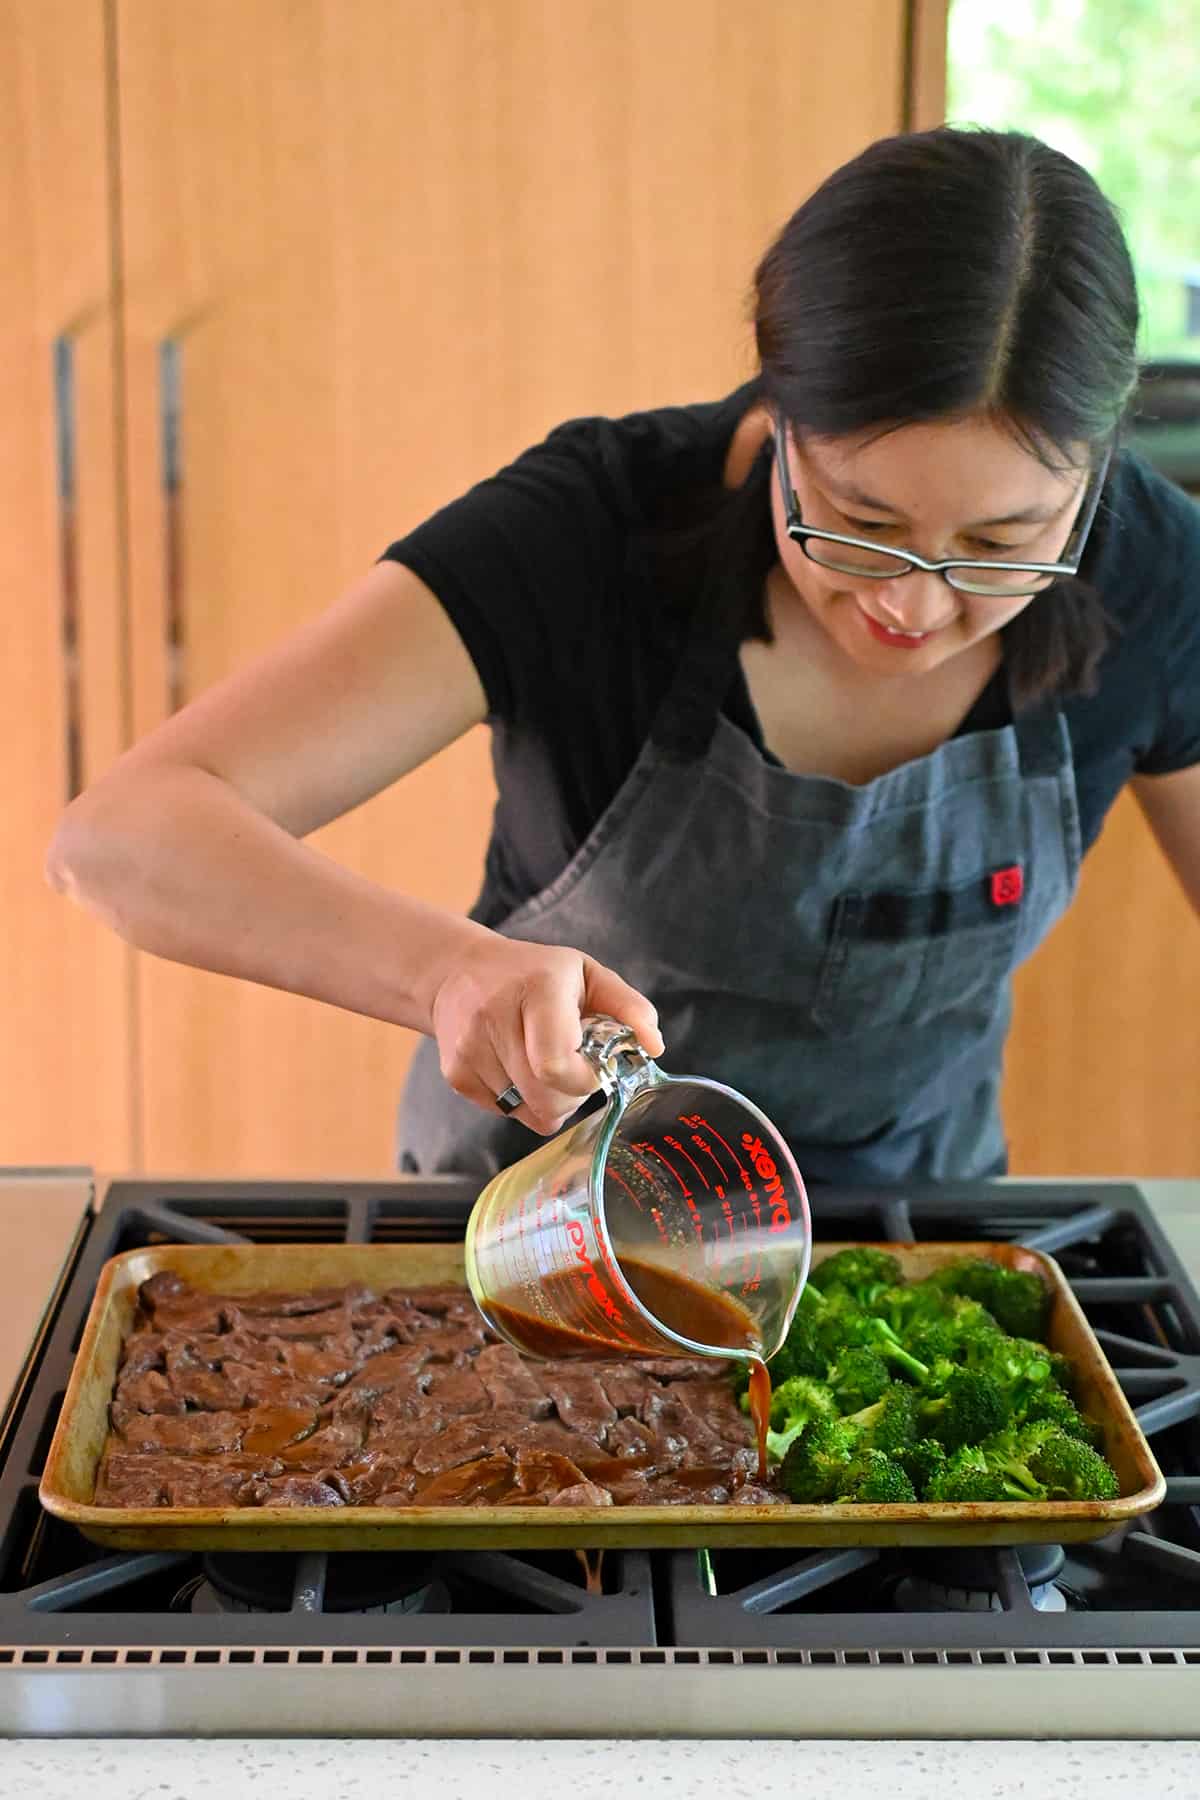 An Asian woman is pouring a brown sauce onto a sheet pan filled with sliced beef and broccoli.